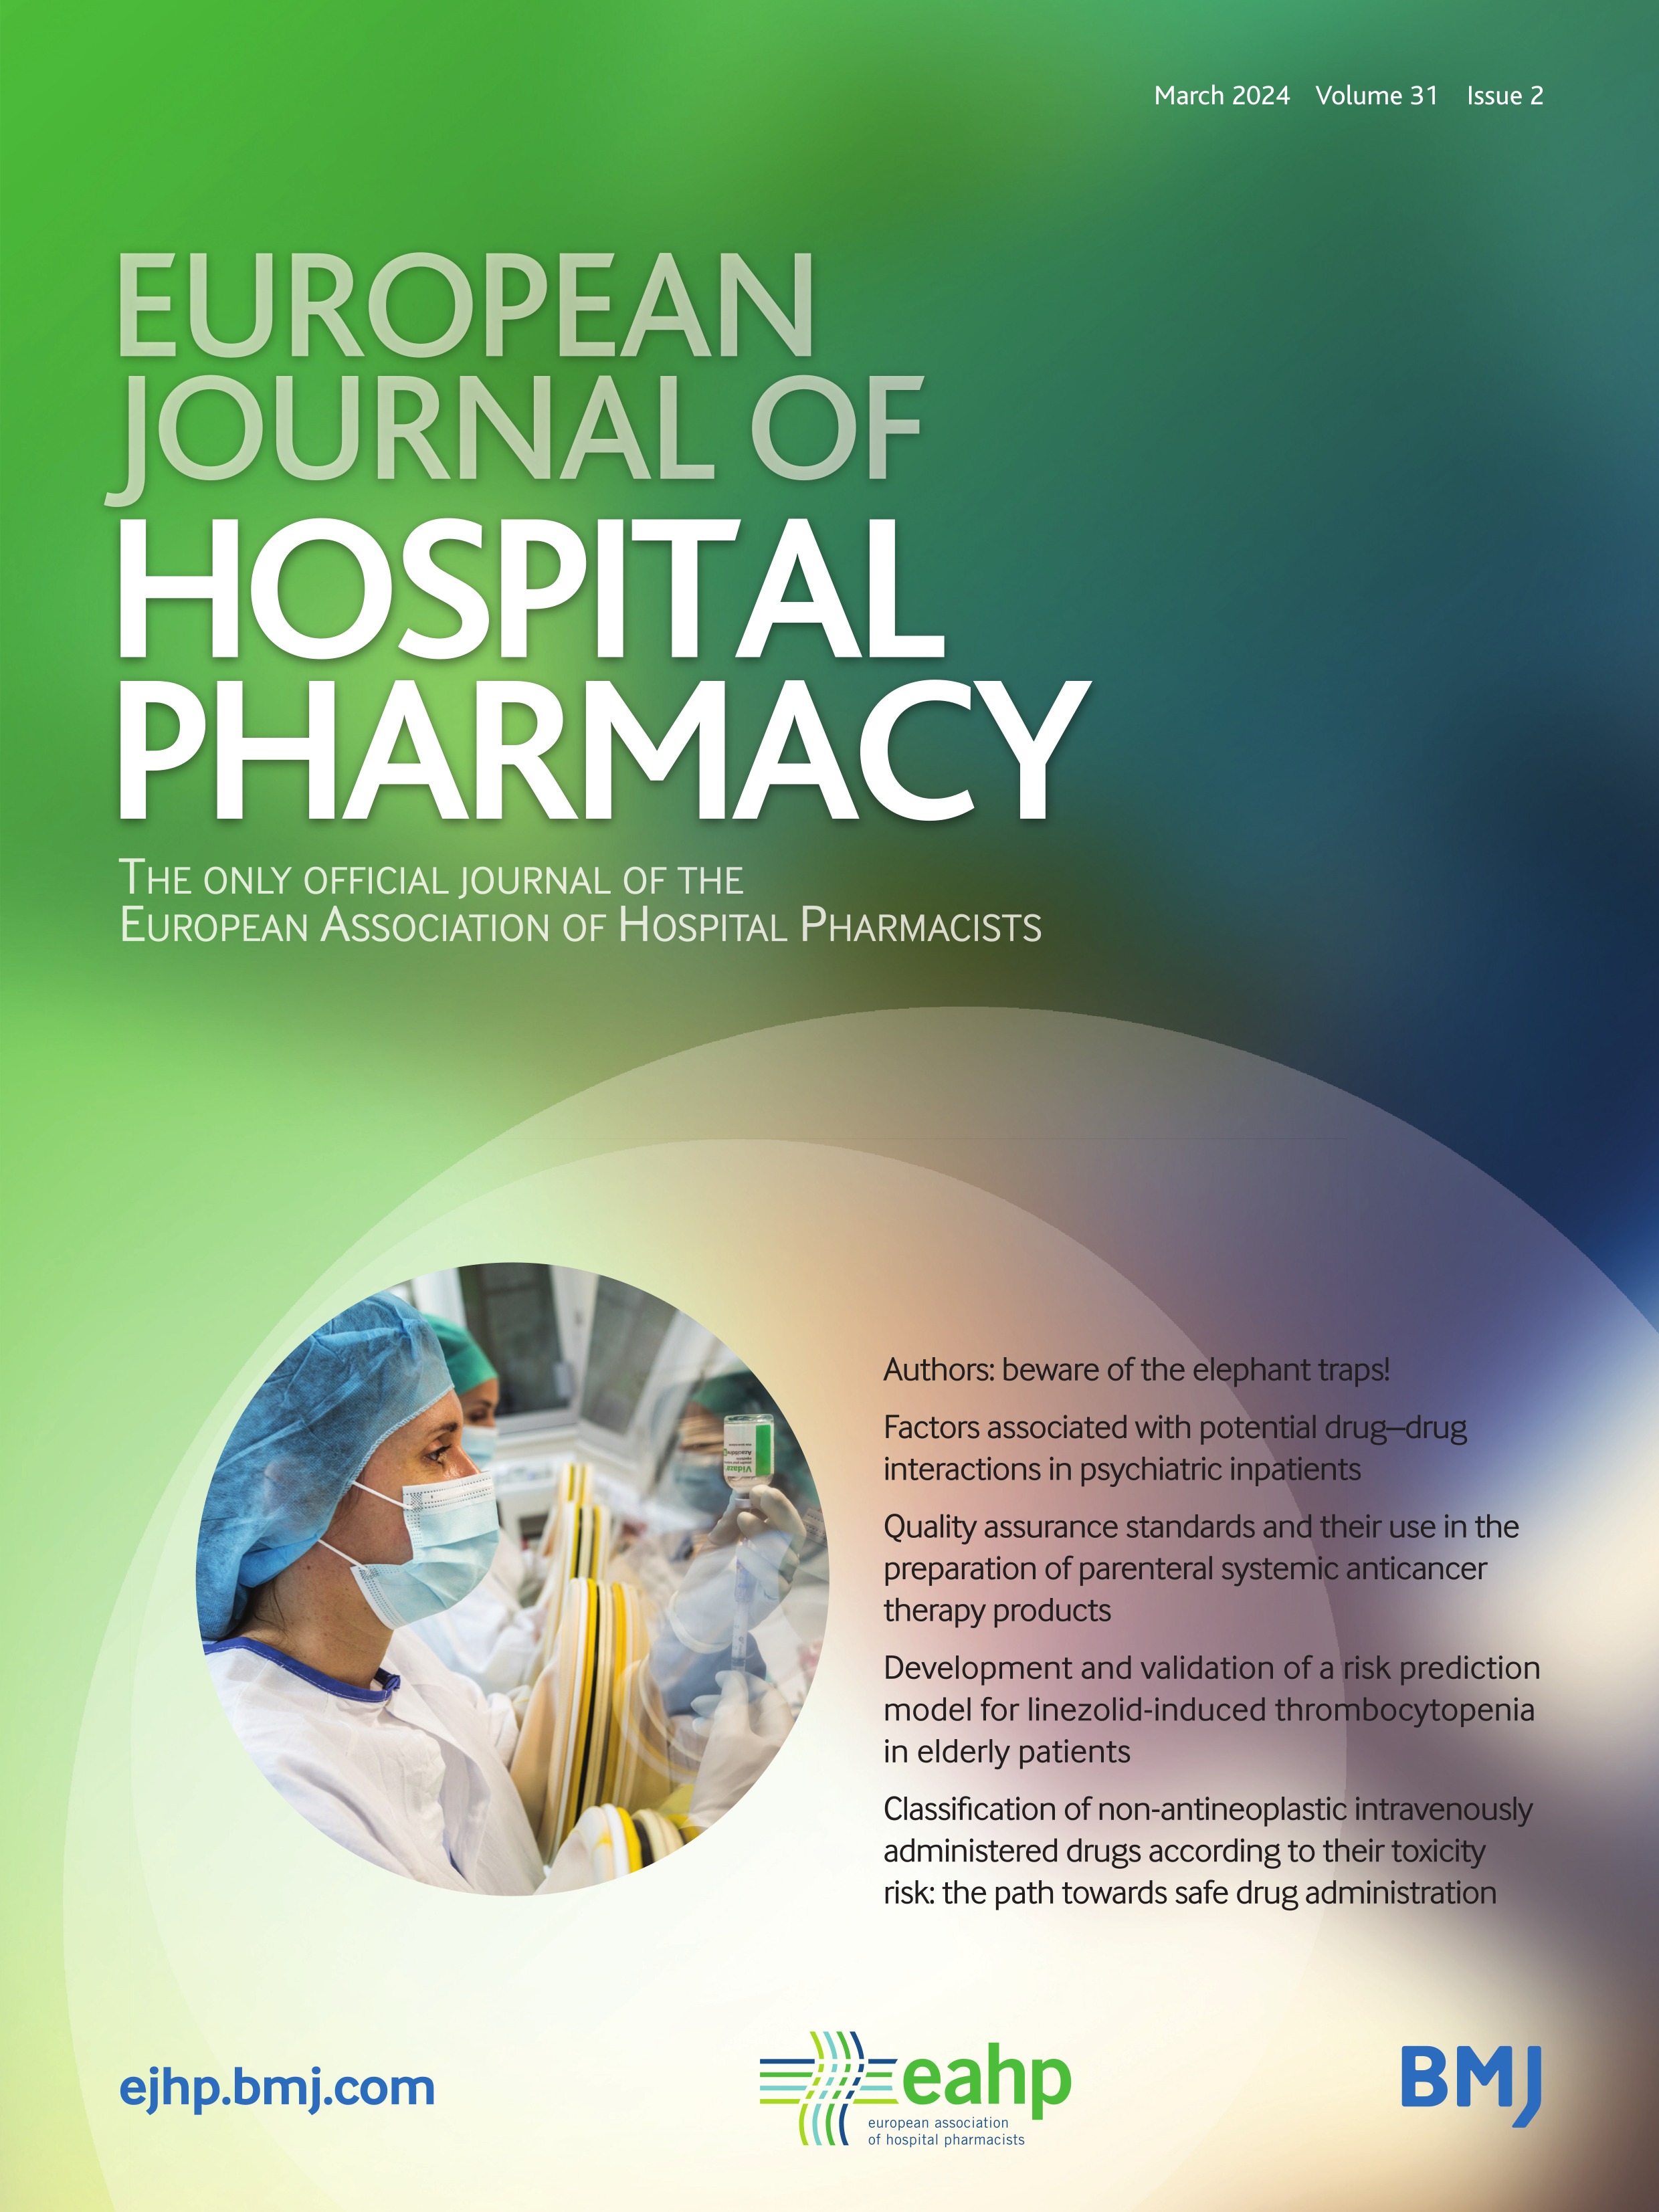 Classification of non-antineoplastic intravenously administered drugs according to their toxicity risk: the path towards safe drug administration